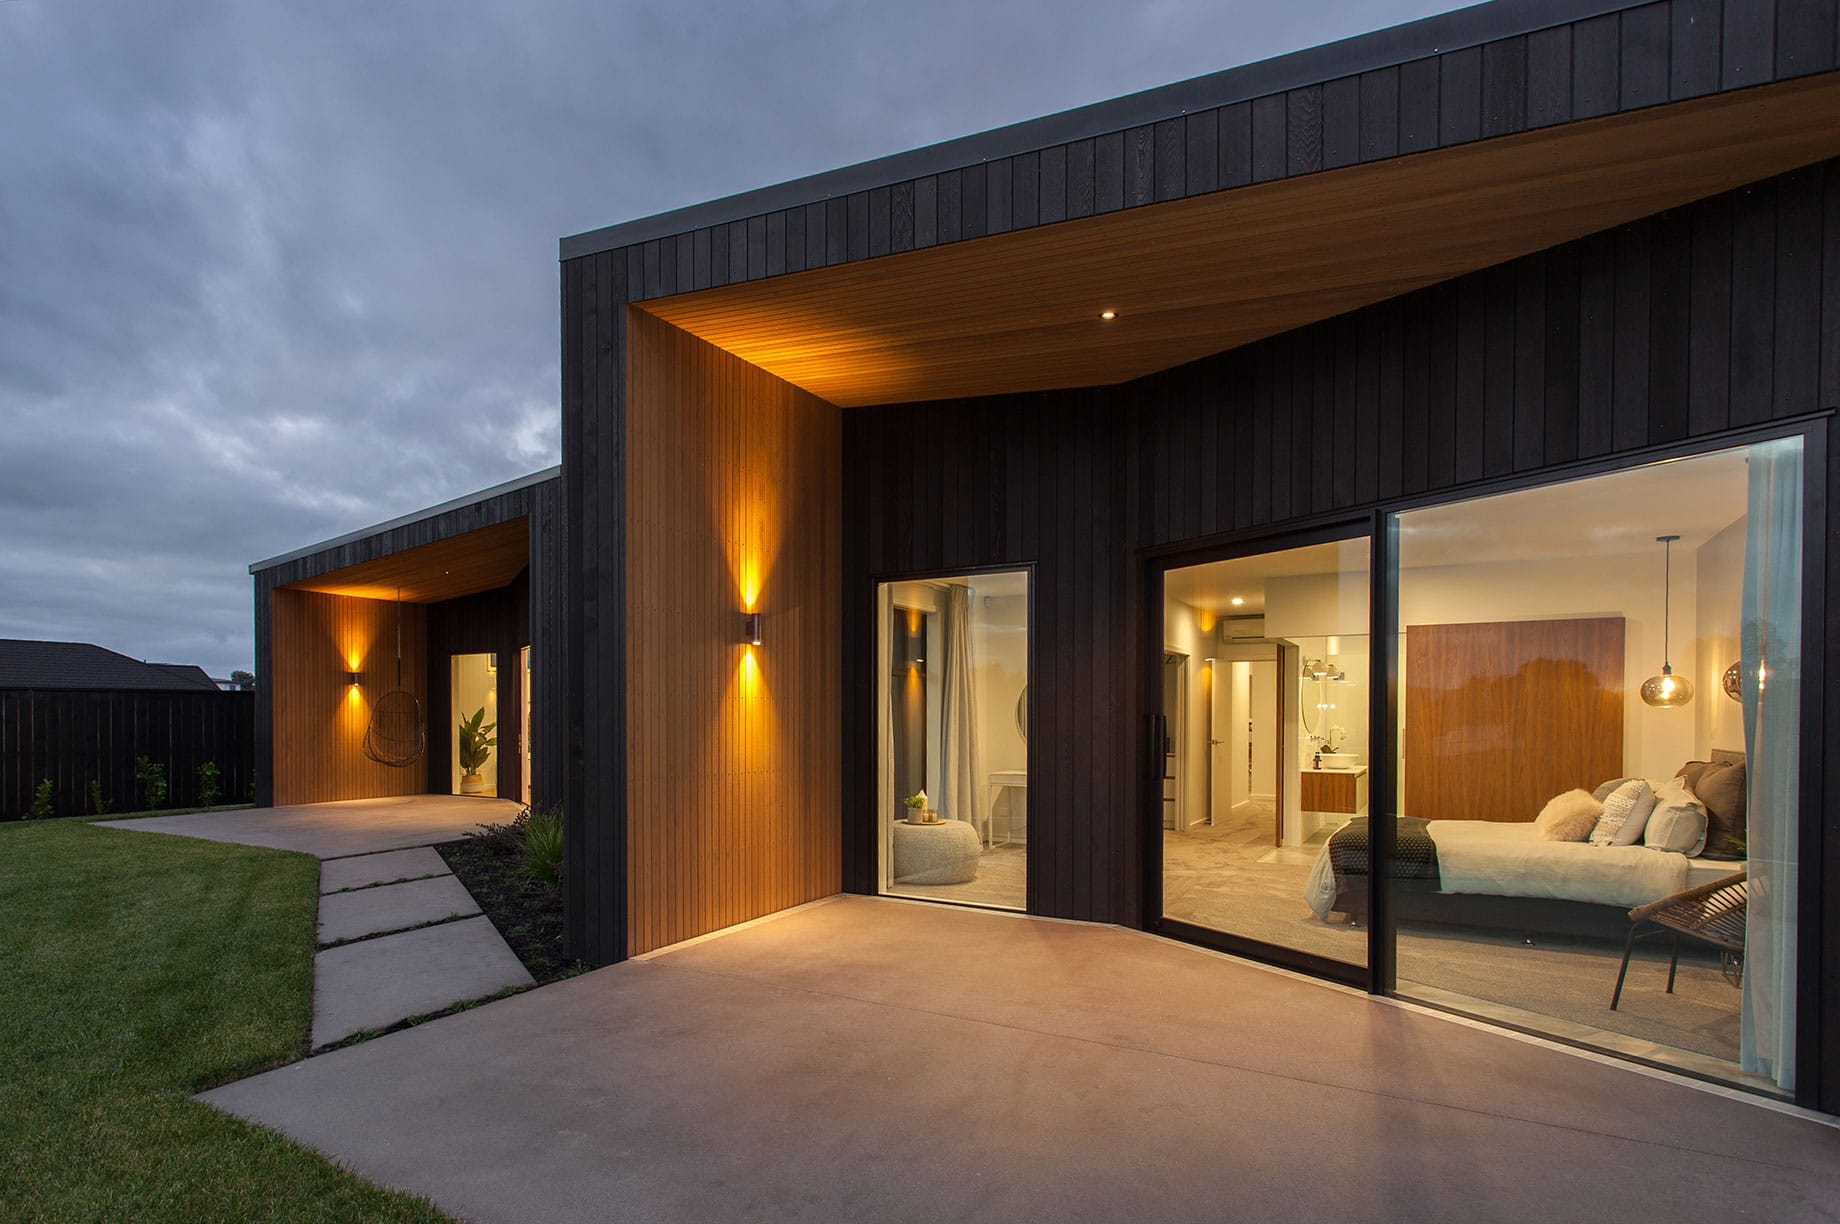 Waikato showhome exterior in night time